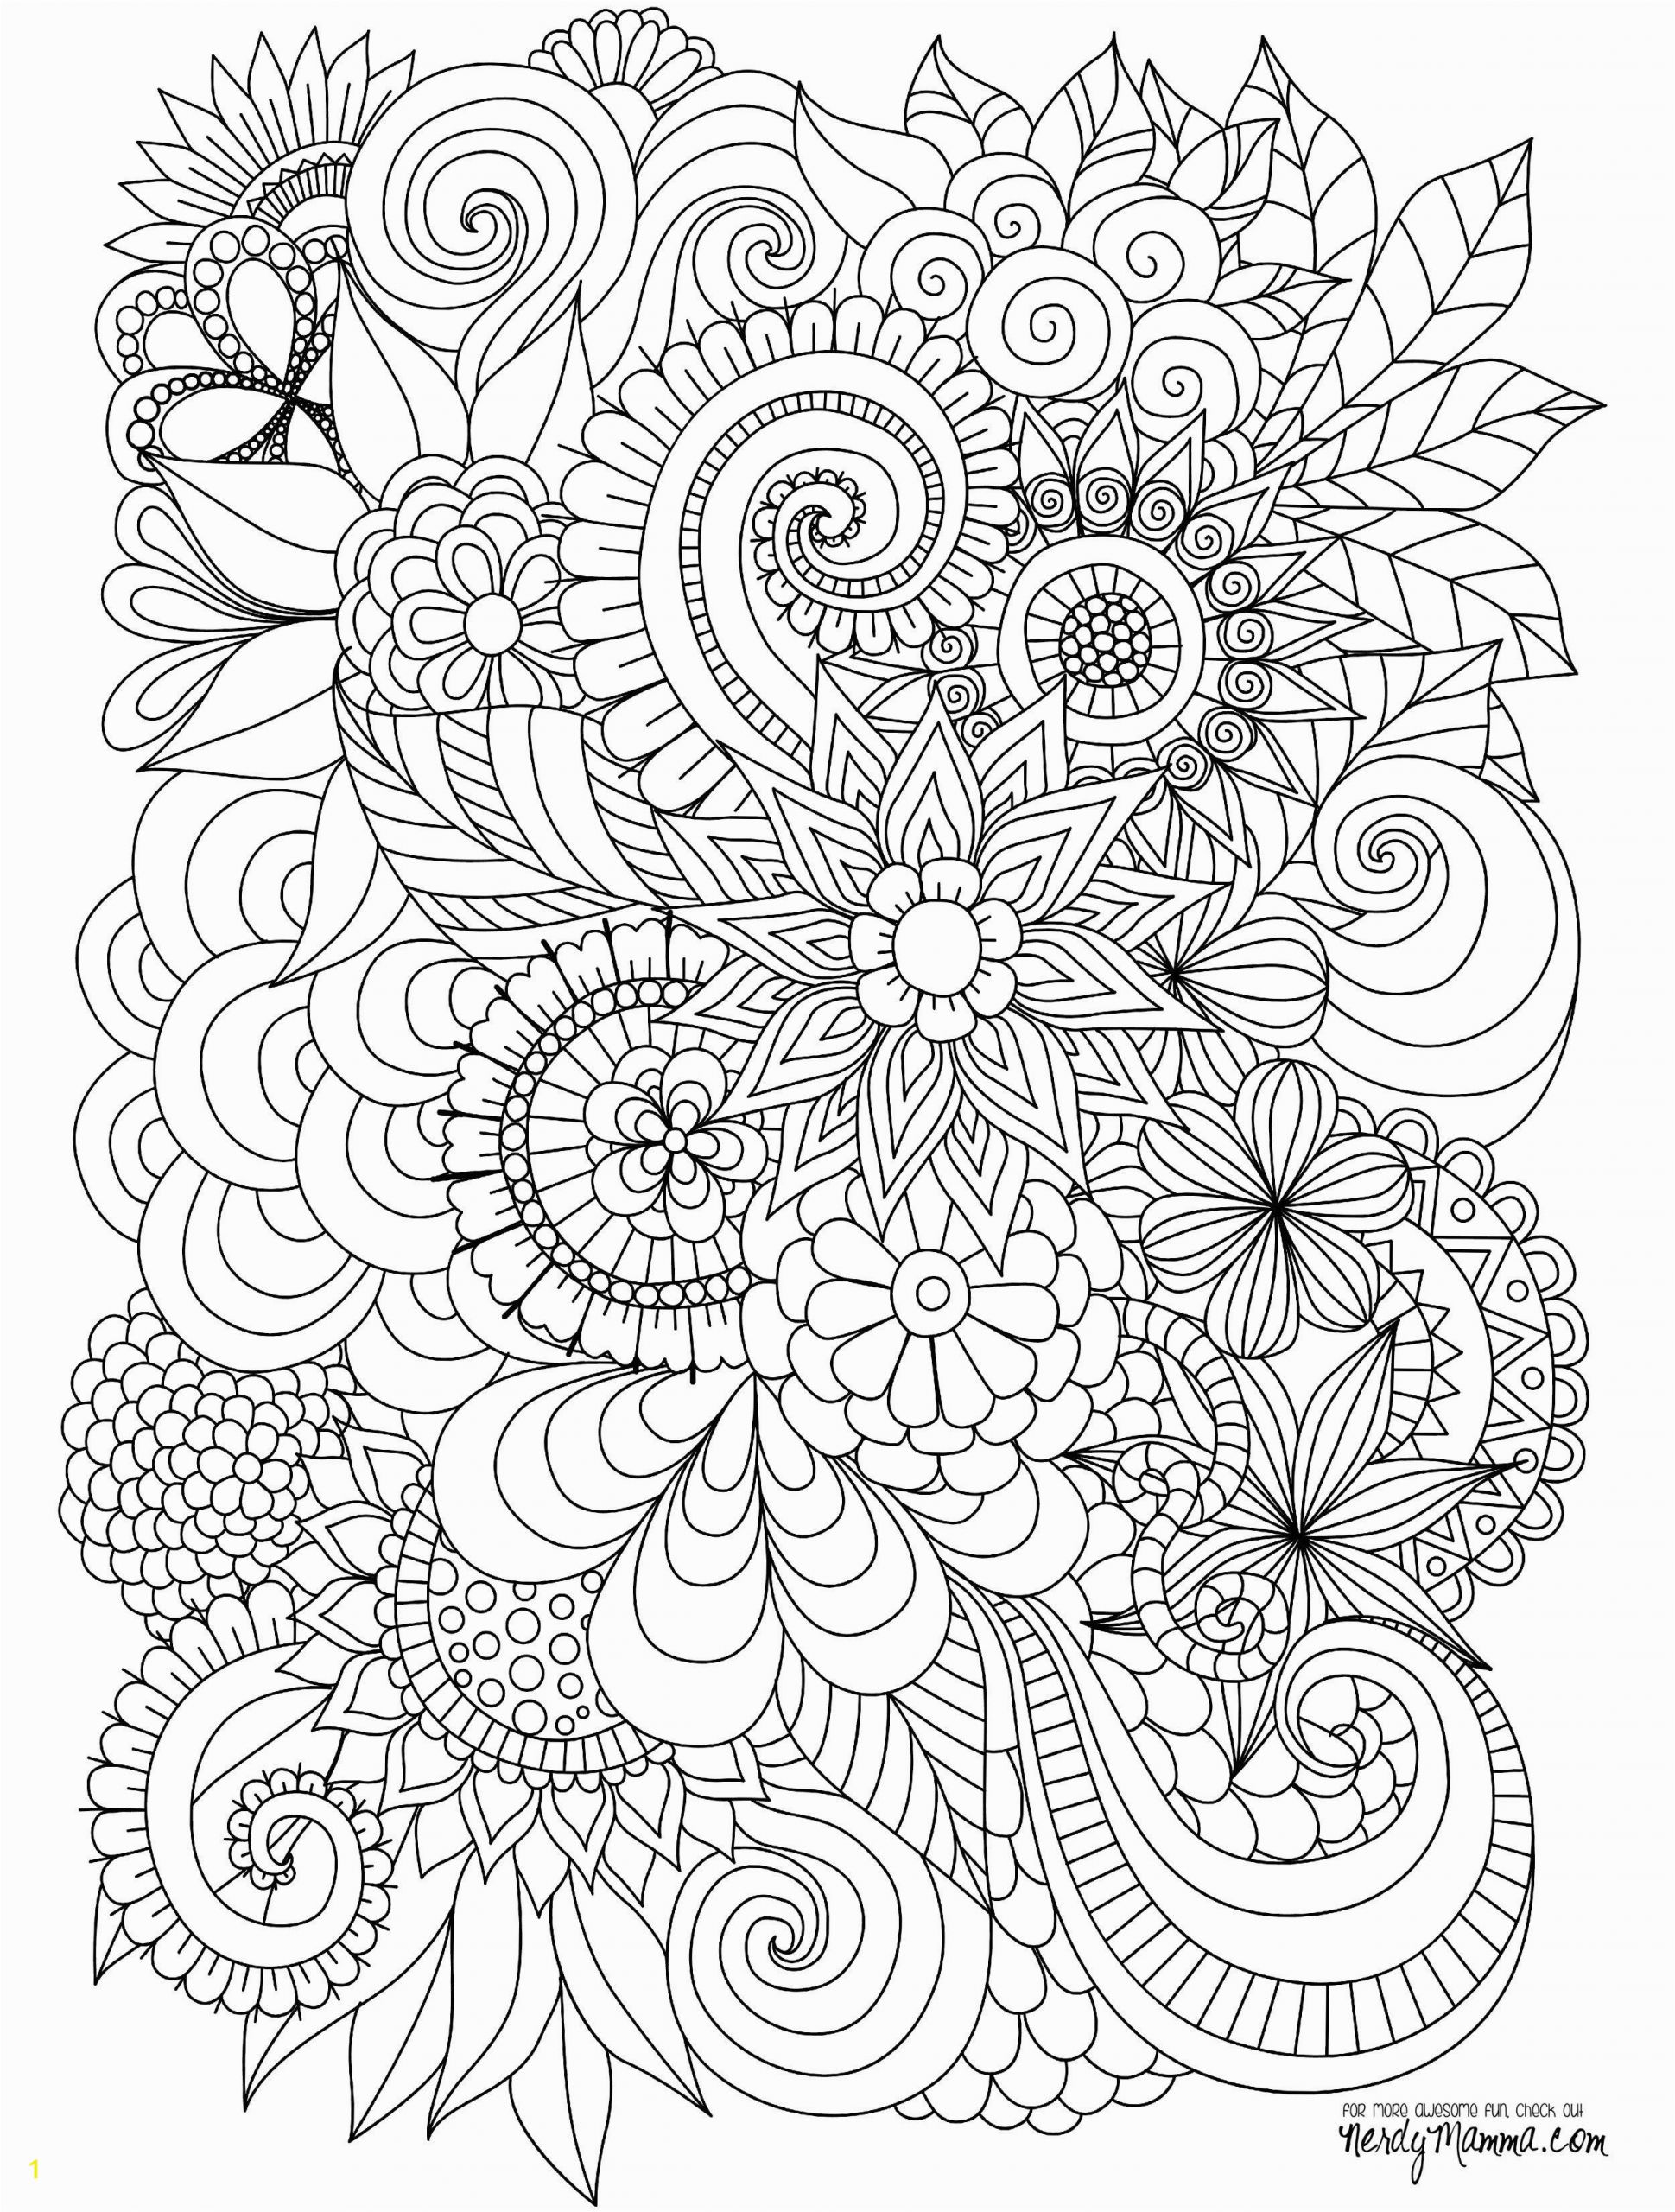 Zen Doodle Coloring Pages Printable 11 Free Printable Adult Coloring Pages